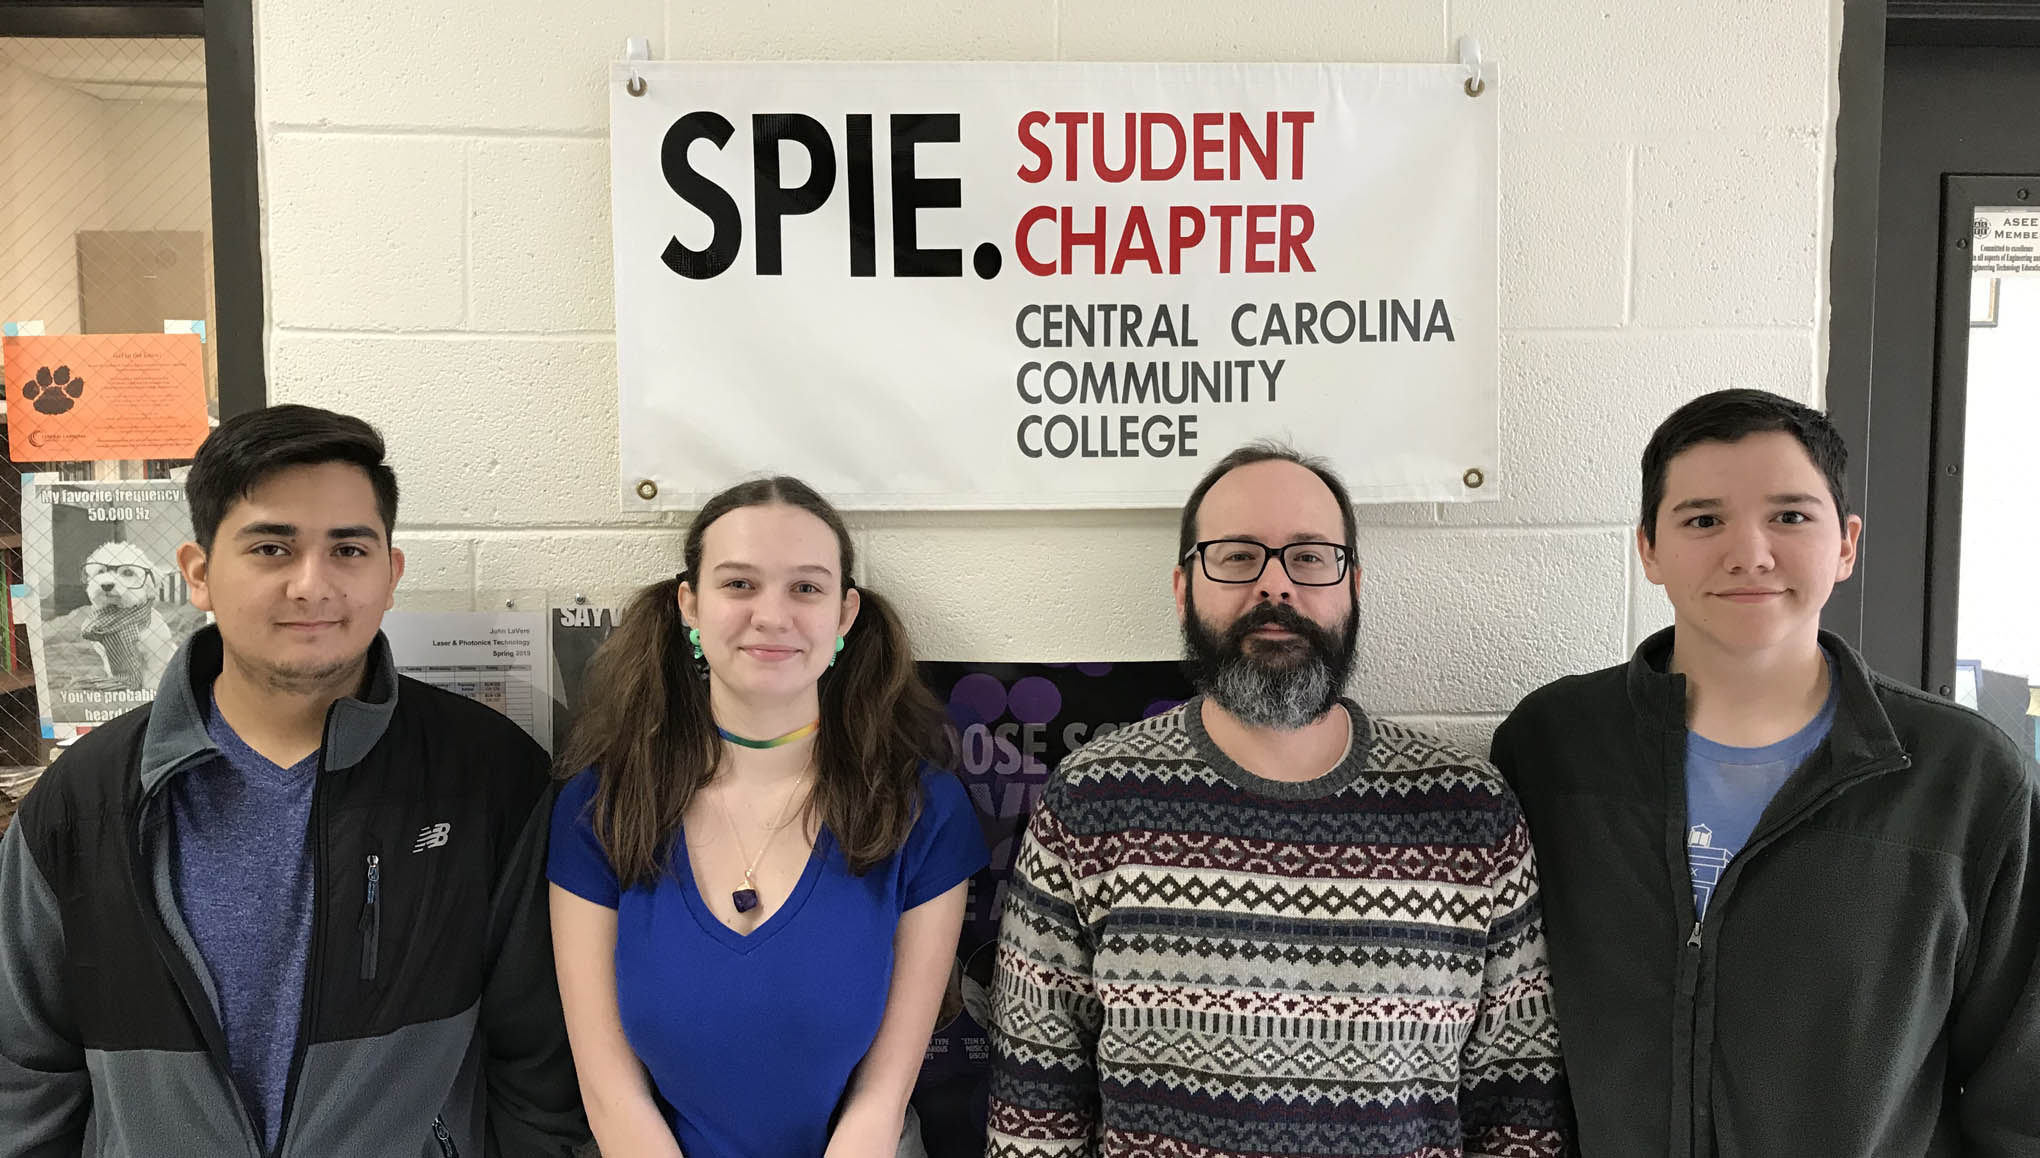 CCCC SPIE Student Chapter will host event on March 18